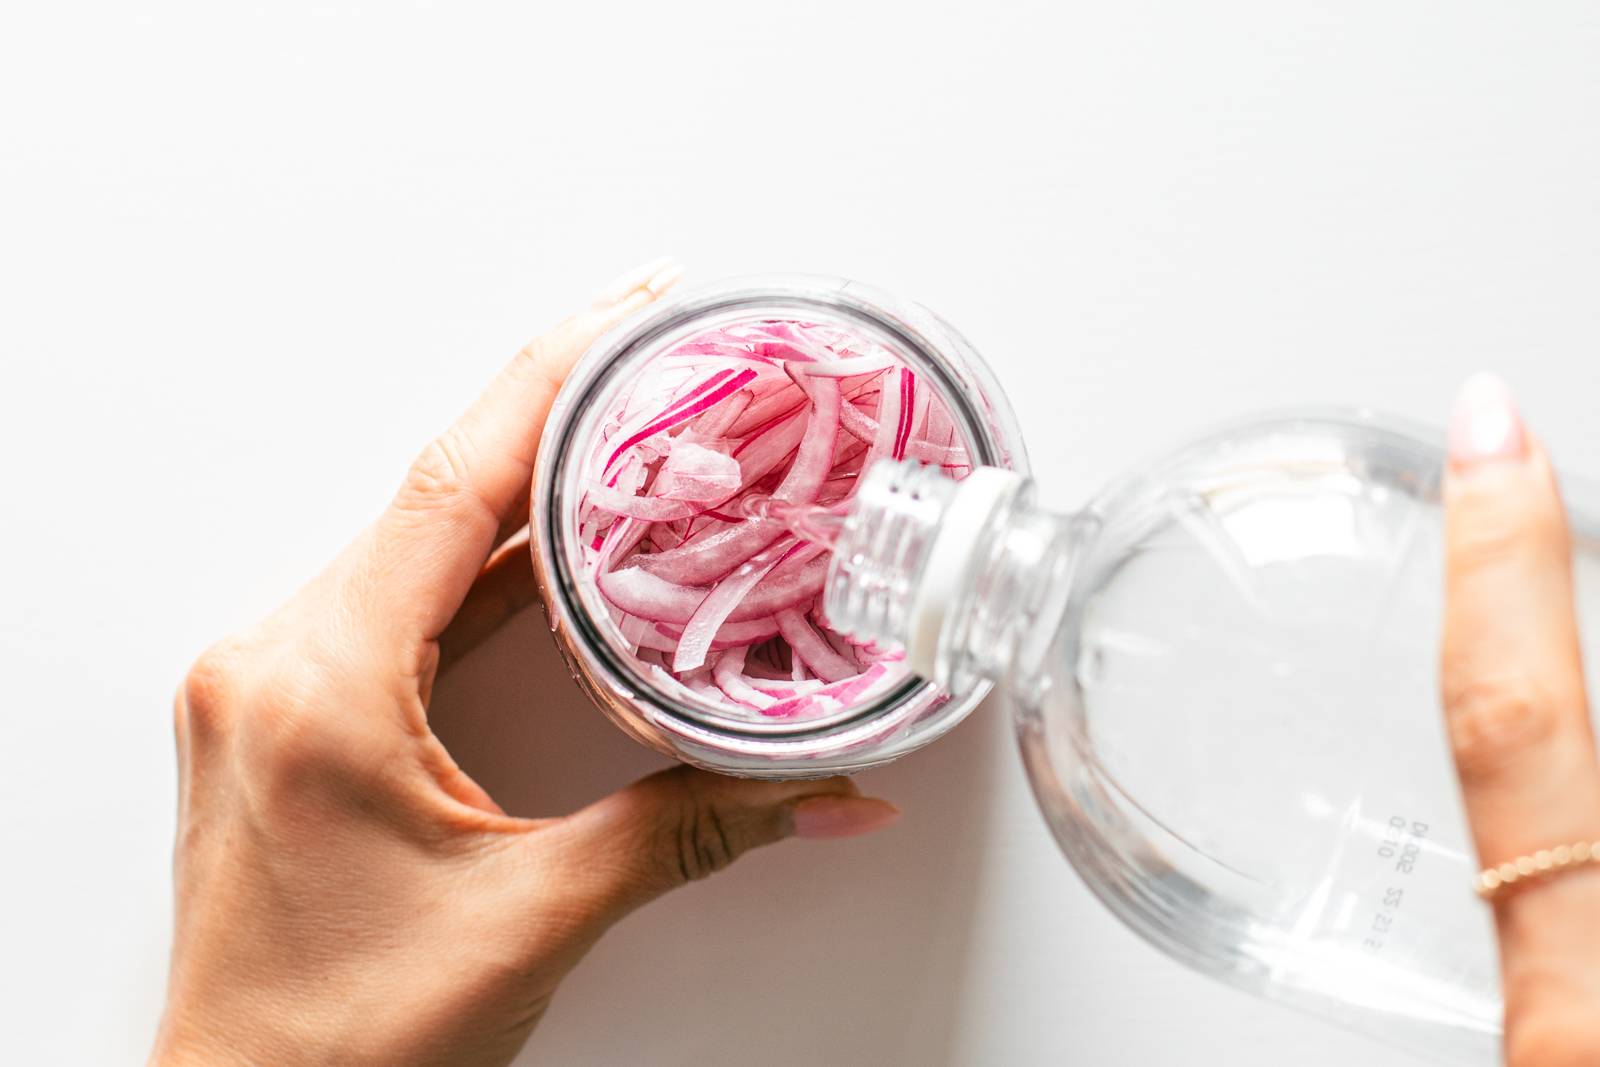 White vinegar is poured into a jar of red onions.